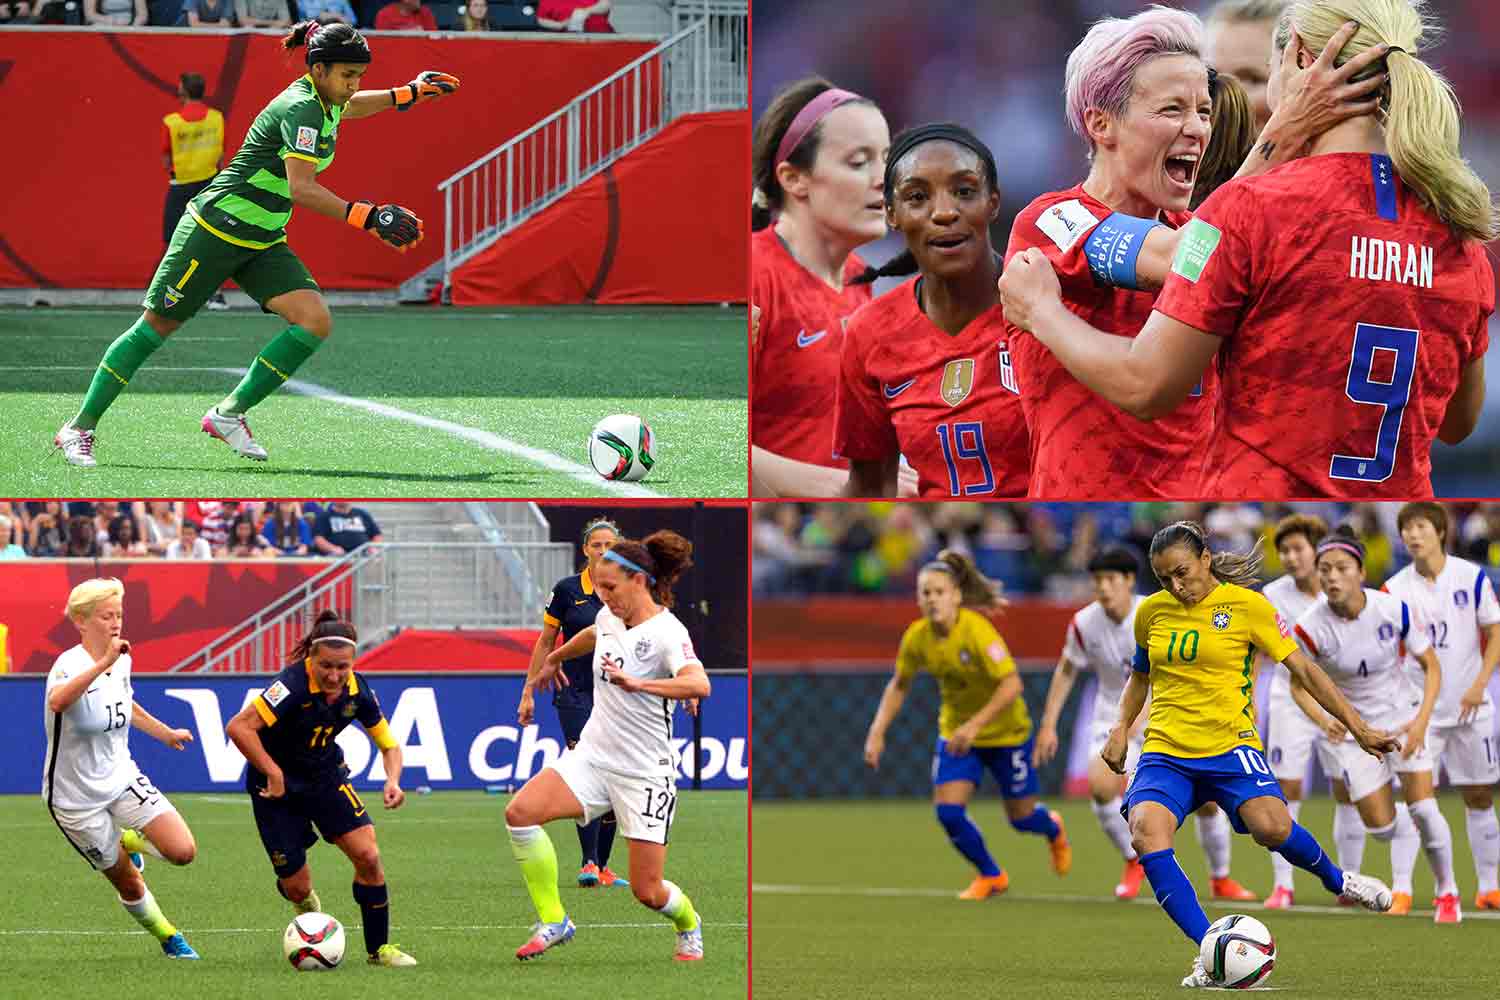 Four images show soccer players during games and celebrating after games.